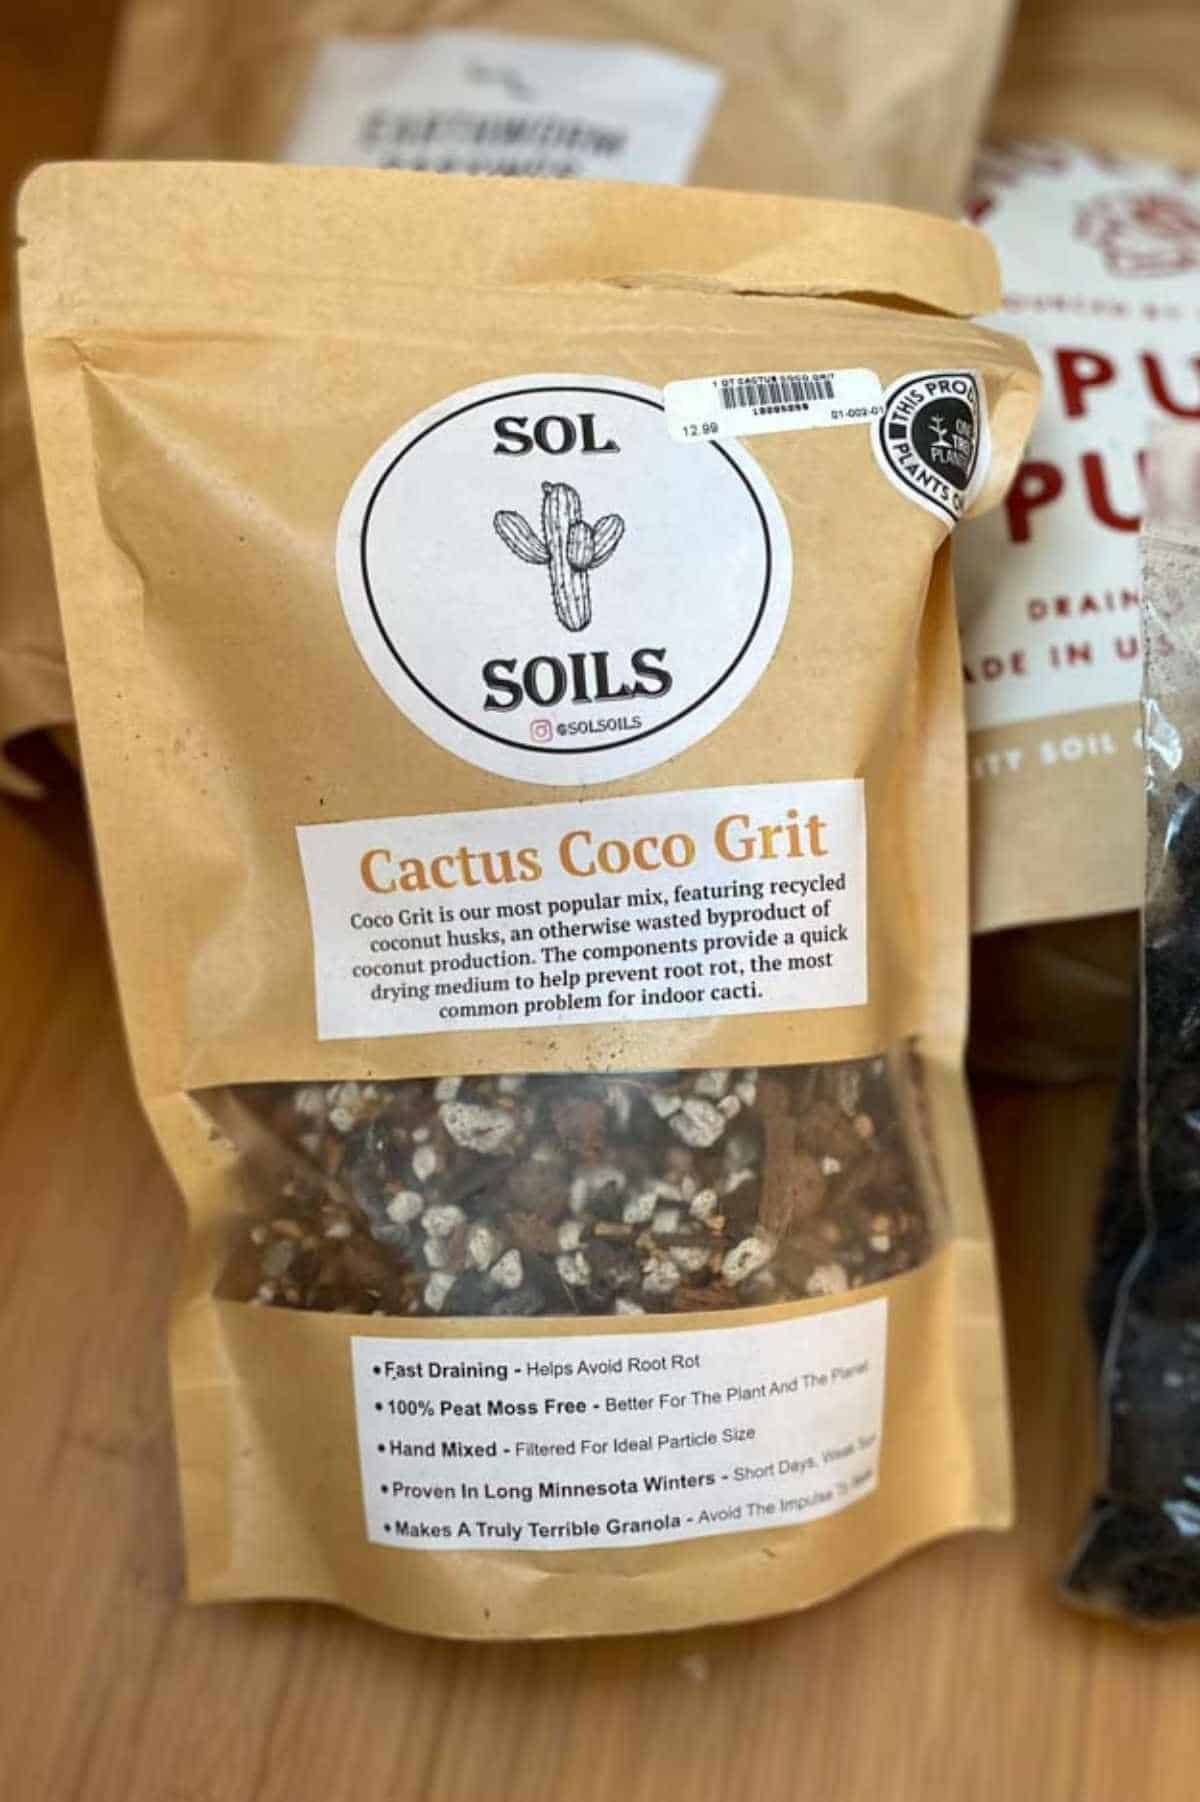 A bag of Sol Soils Cactus Coco Grit, a soil for indoor plants